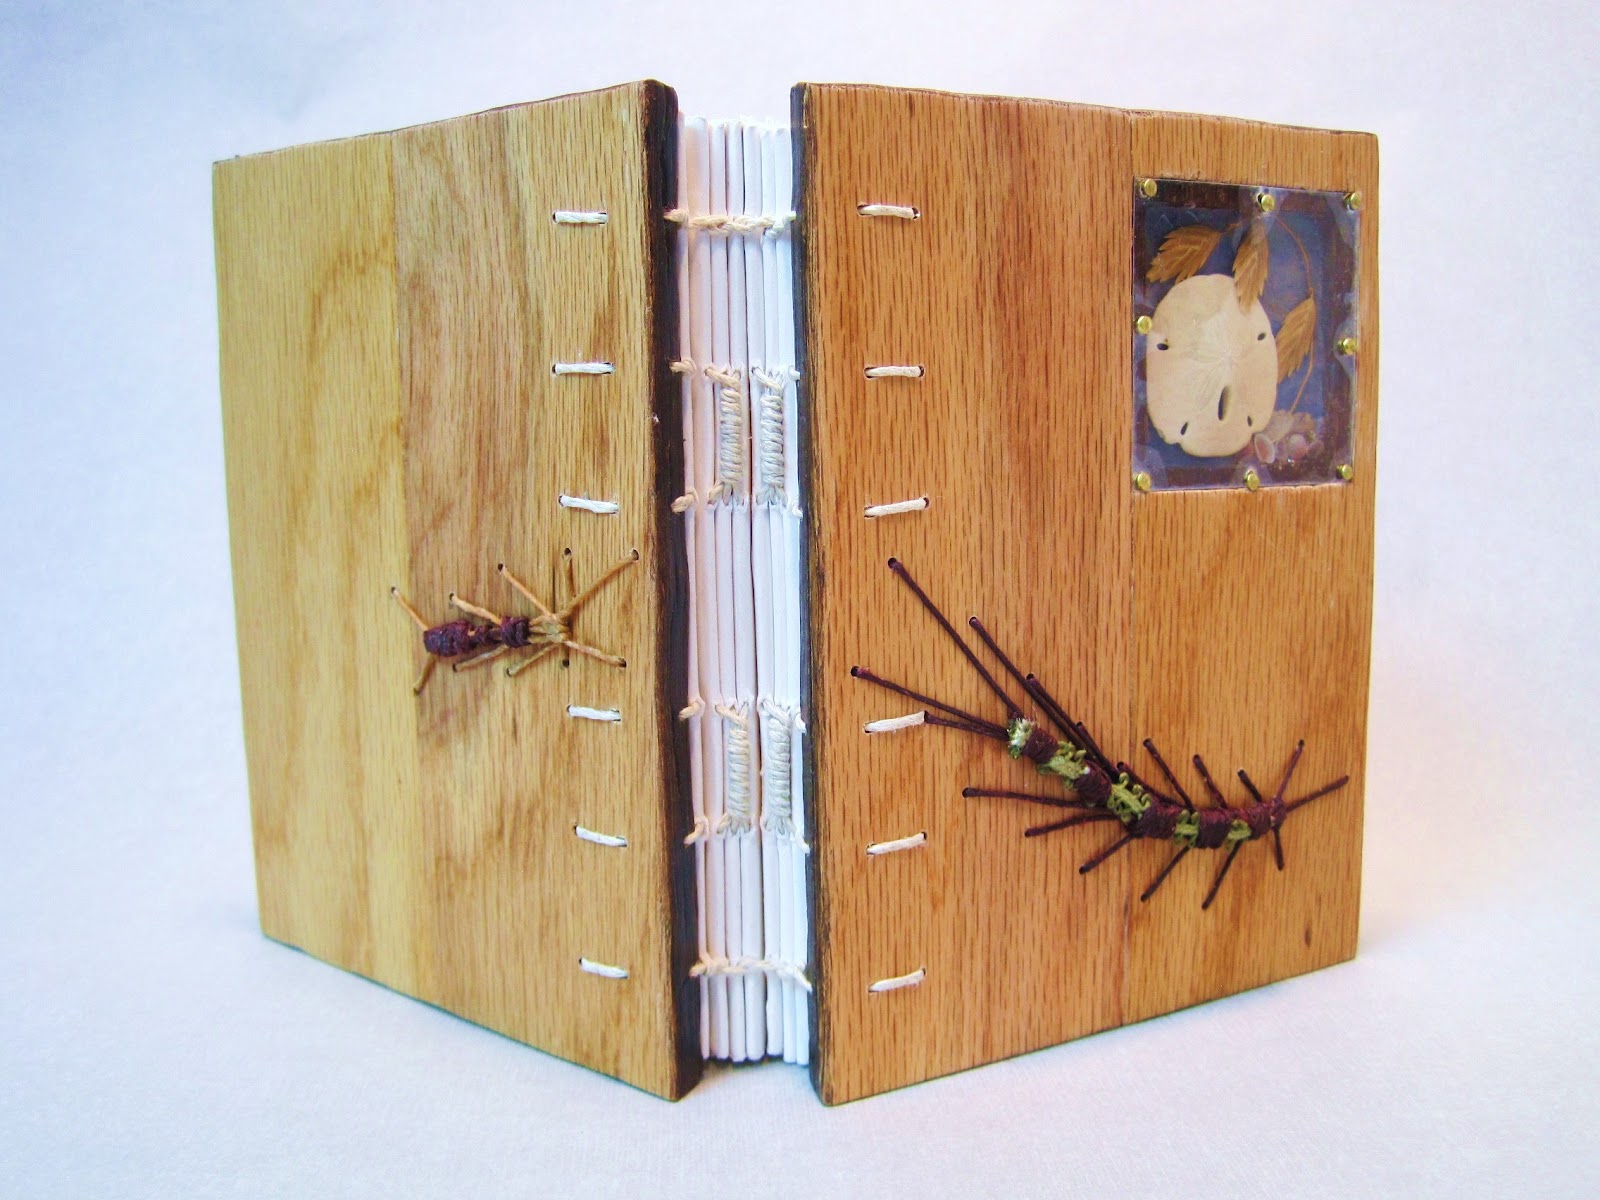 wood book cover